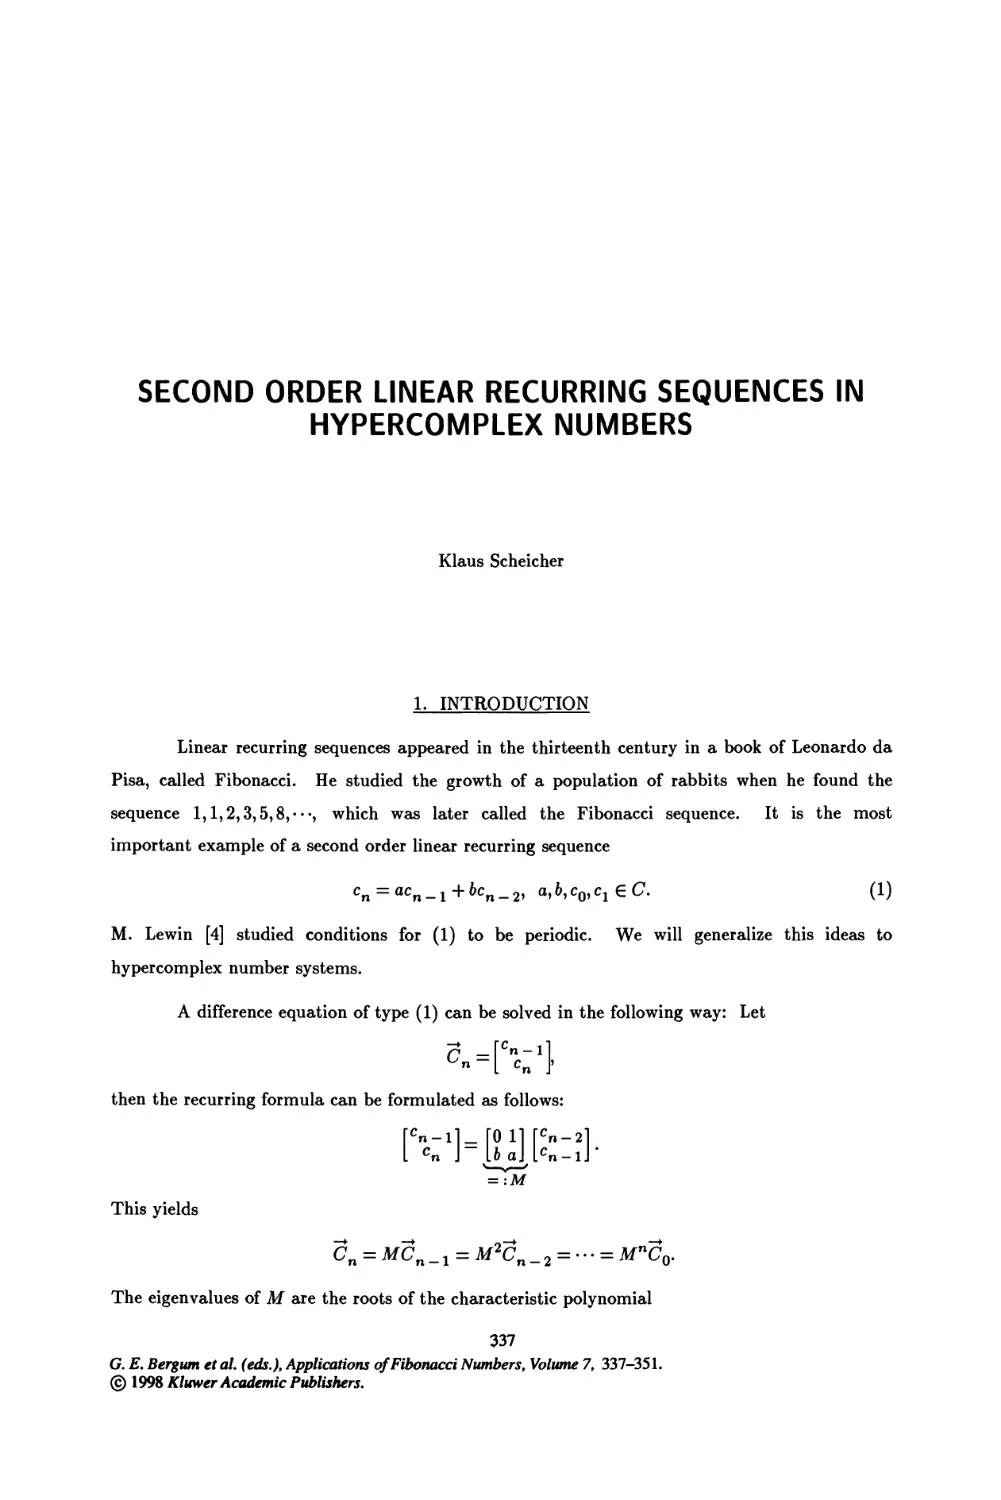 39. Second Order Linear Recurring Sequences in Hypercomplex Numbers